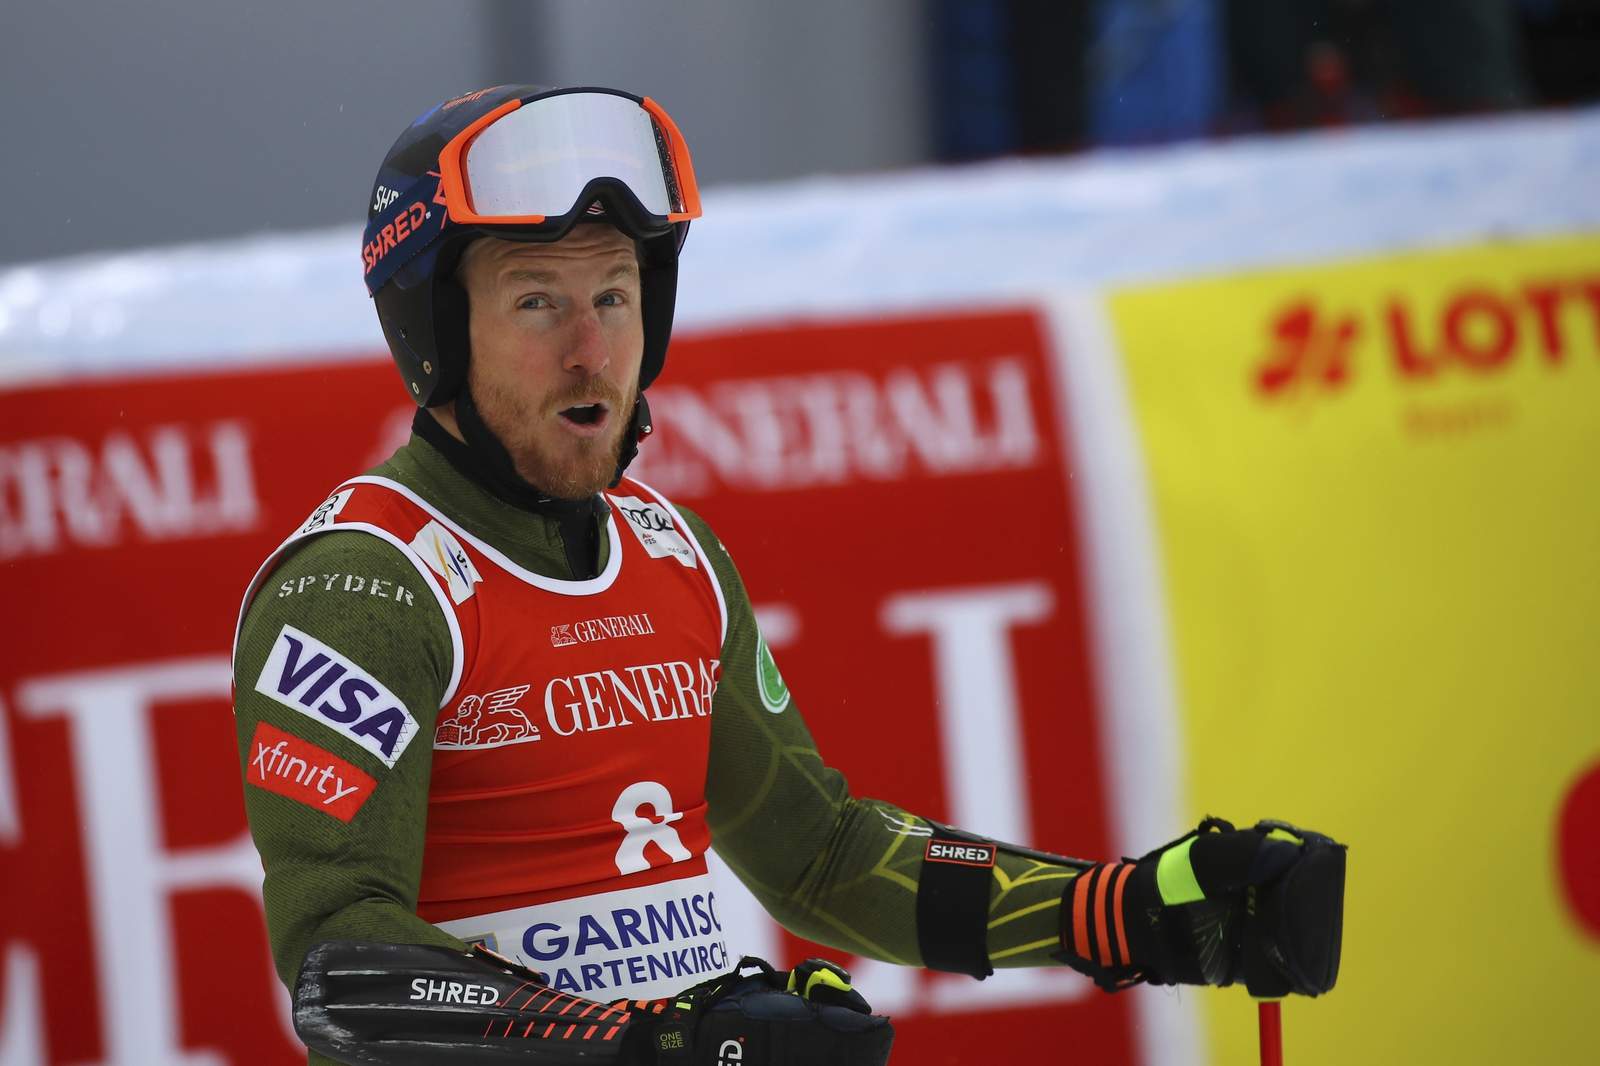 2-time Olympic champion Ted Ligety to retire after worlds